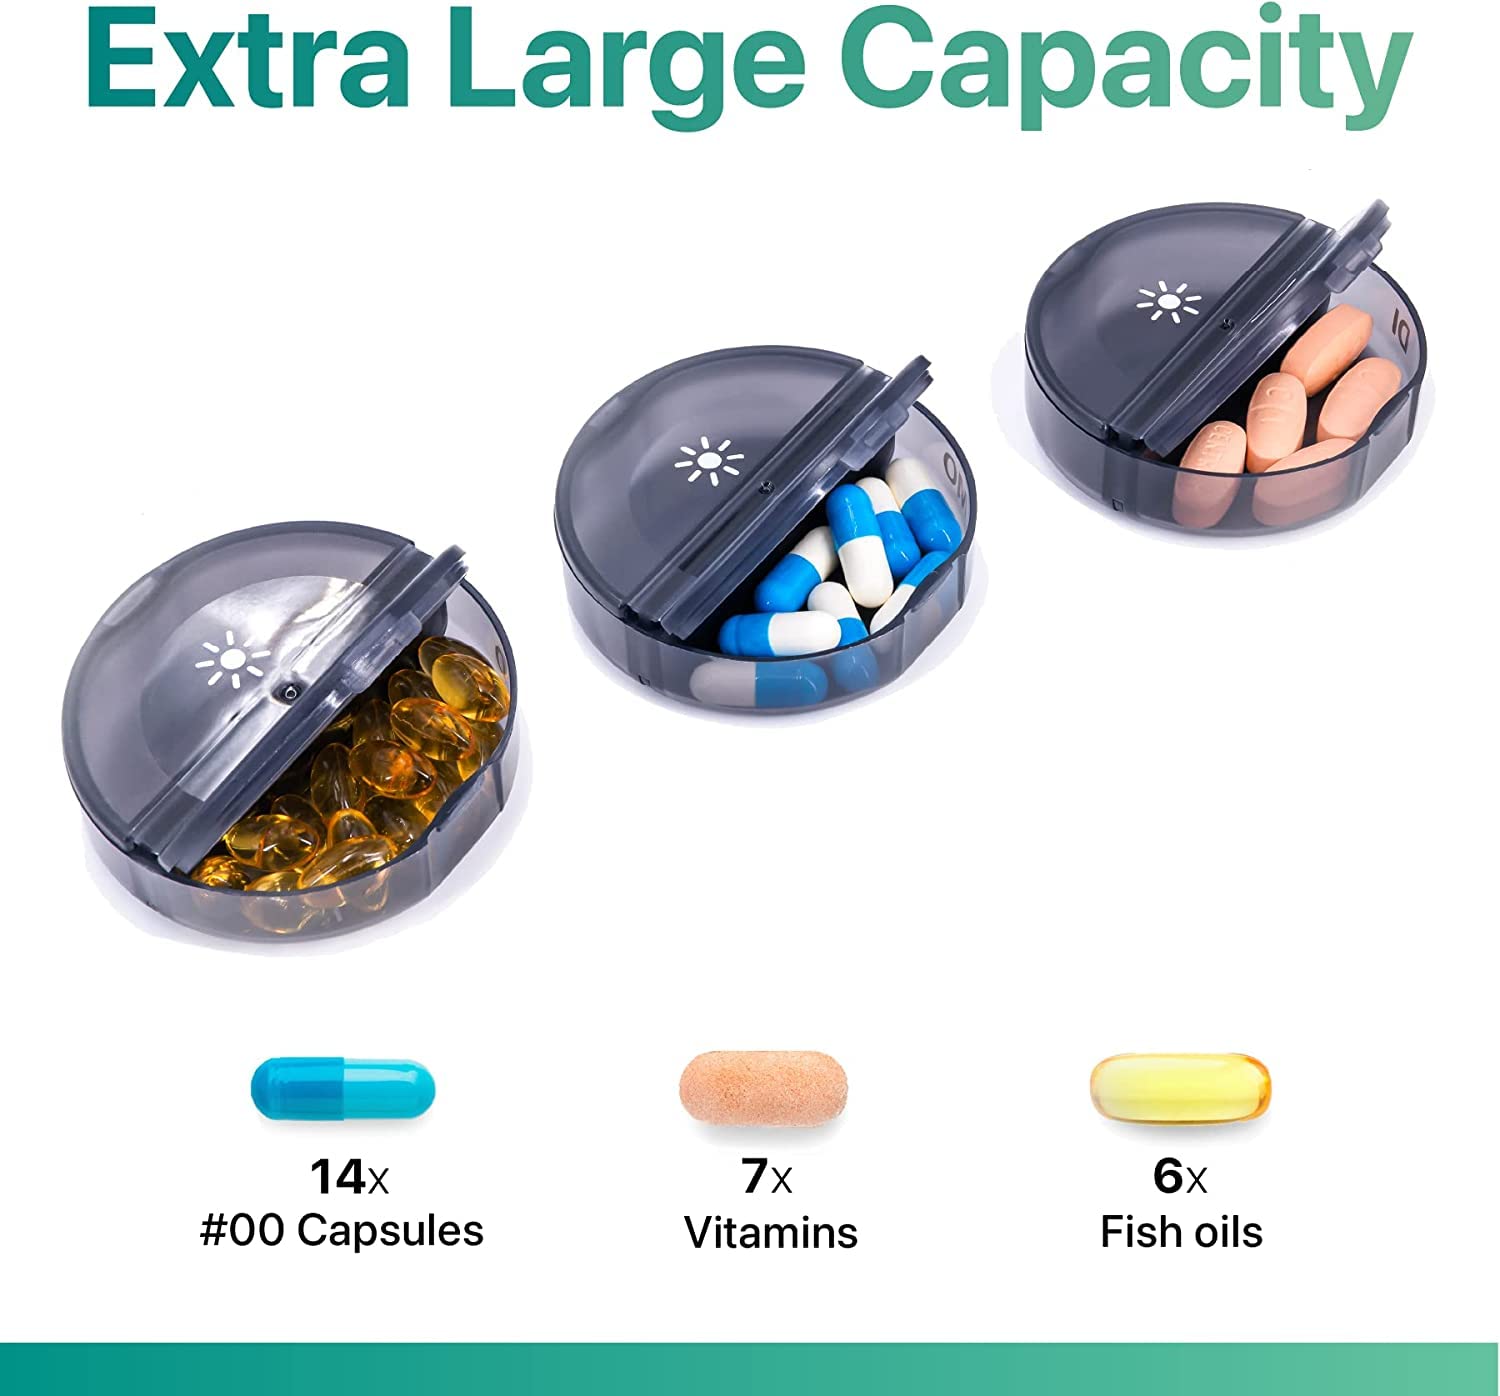 Weekly Pill Organizer 7 Day 2 Times a Day, Sukuos Large Travel Pill Box for Pills/Vitamin/Fish Oil/Supplements, Daily Medicine Organizer Box, BPA Free Pill Case, Easy to Clean